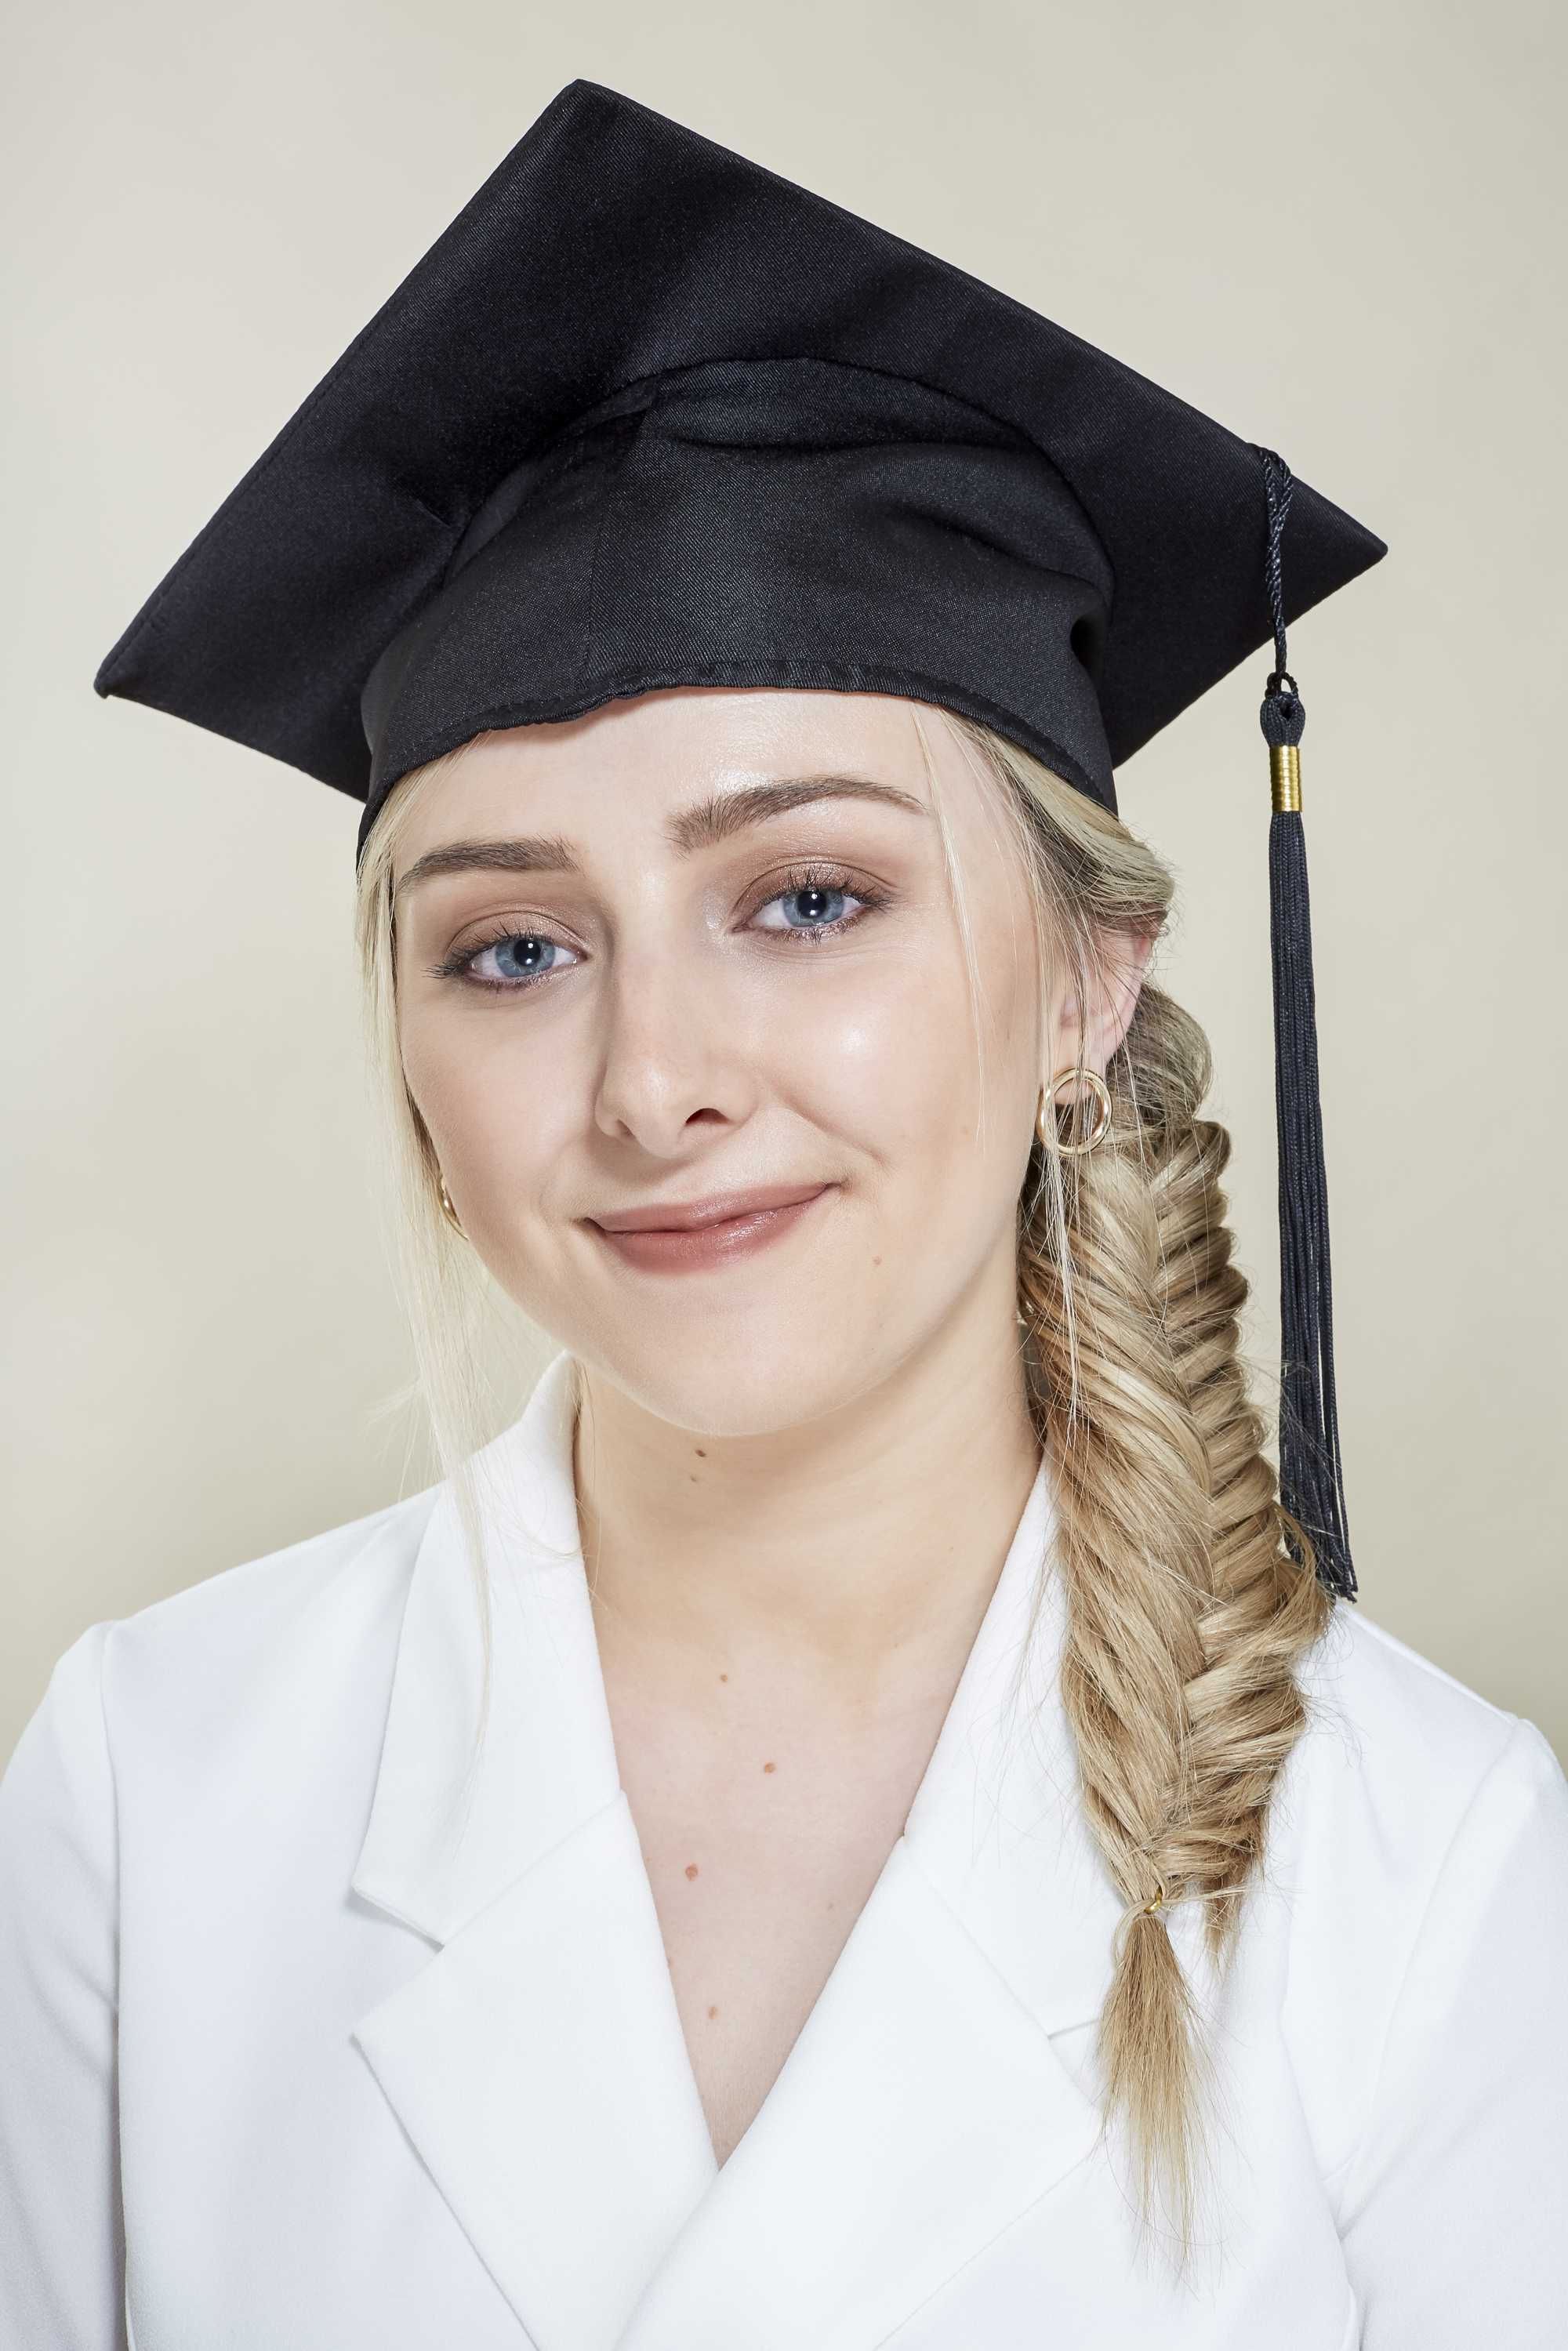 10 Graduation Hairstyles That'll Look Fabulous Under Your Cap Within Short Hair Graduation Cap (View 7 of 25)